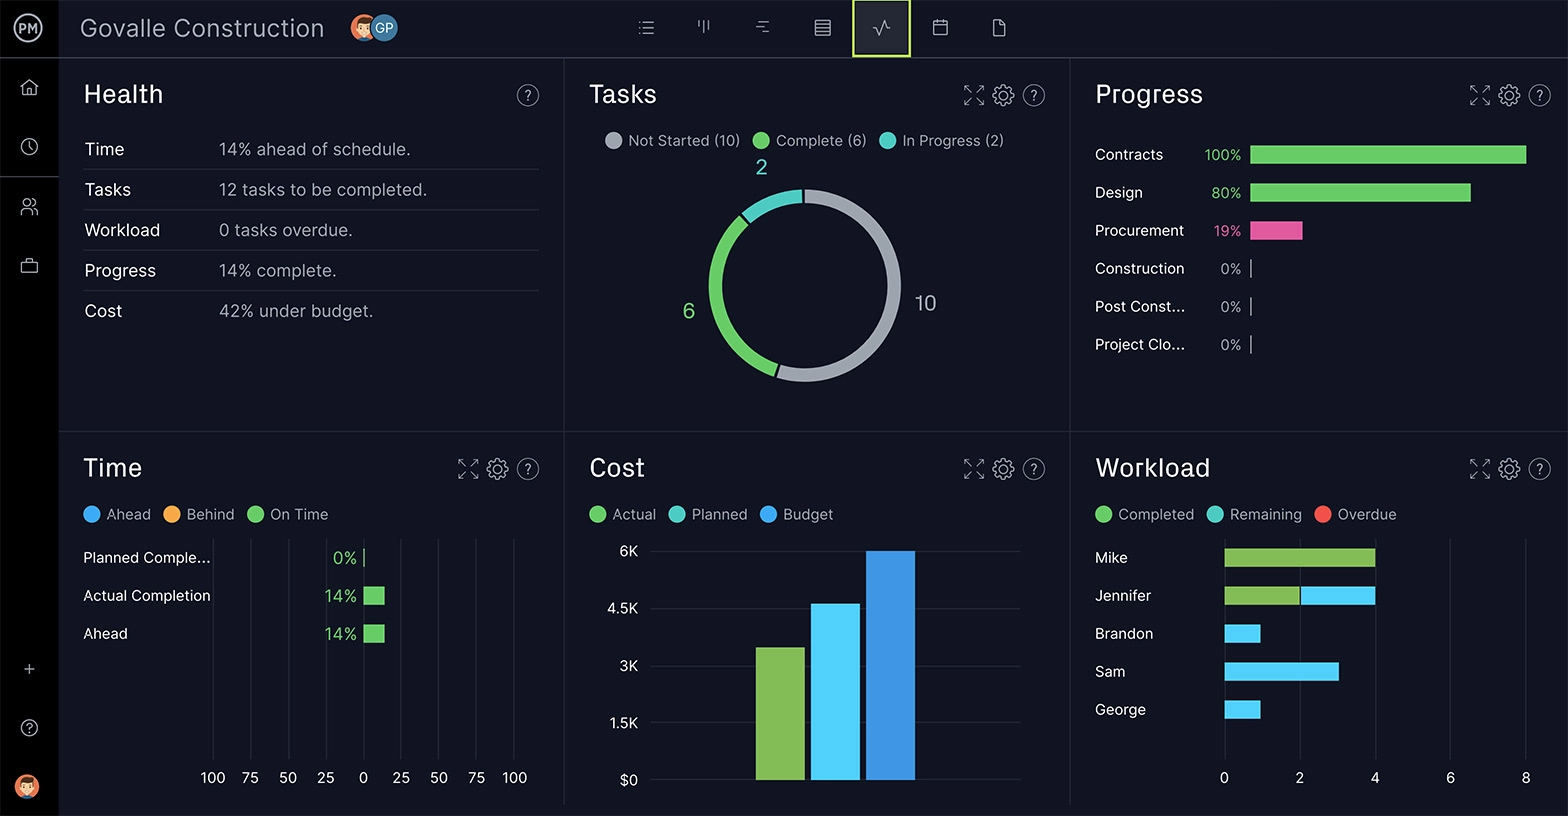 dashboard showing product launch metrics in real-time